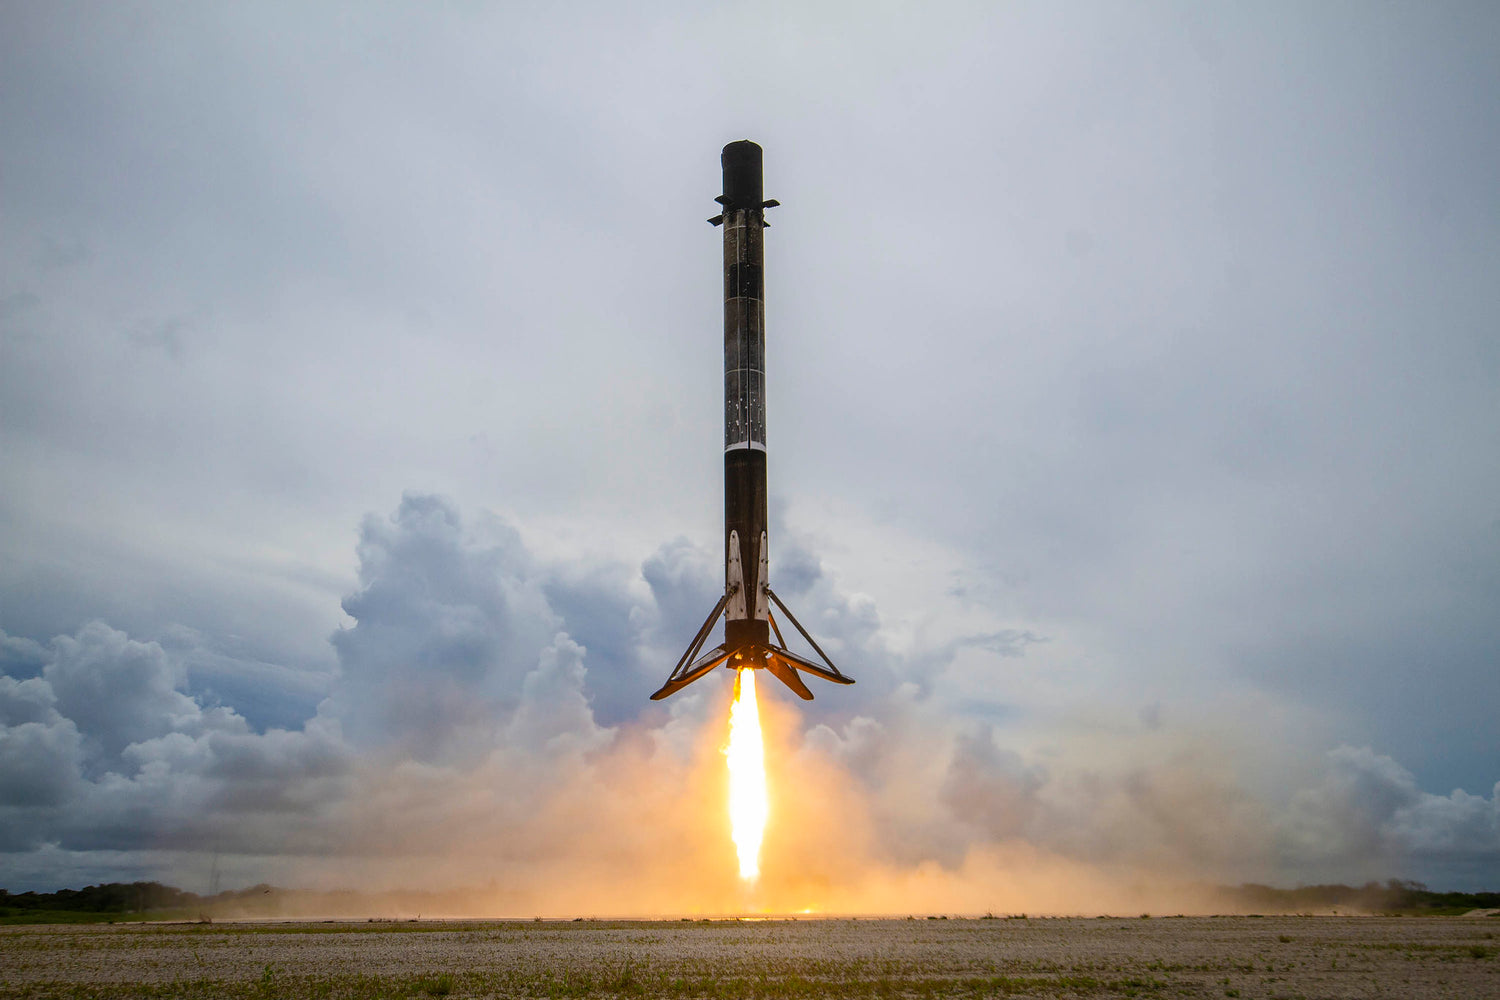 SpaceX Flight-Proven Falcon 9 Launches 88 Spacecraft To Polar Orbit During Transporter-2 Mission